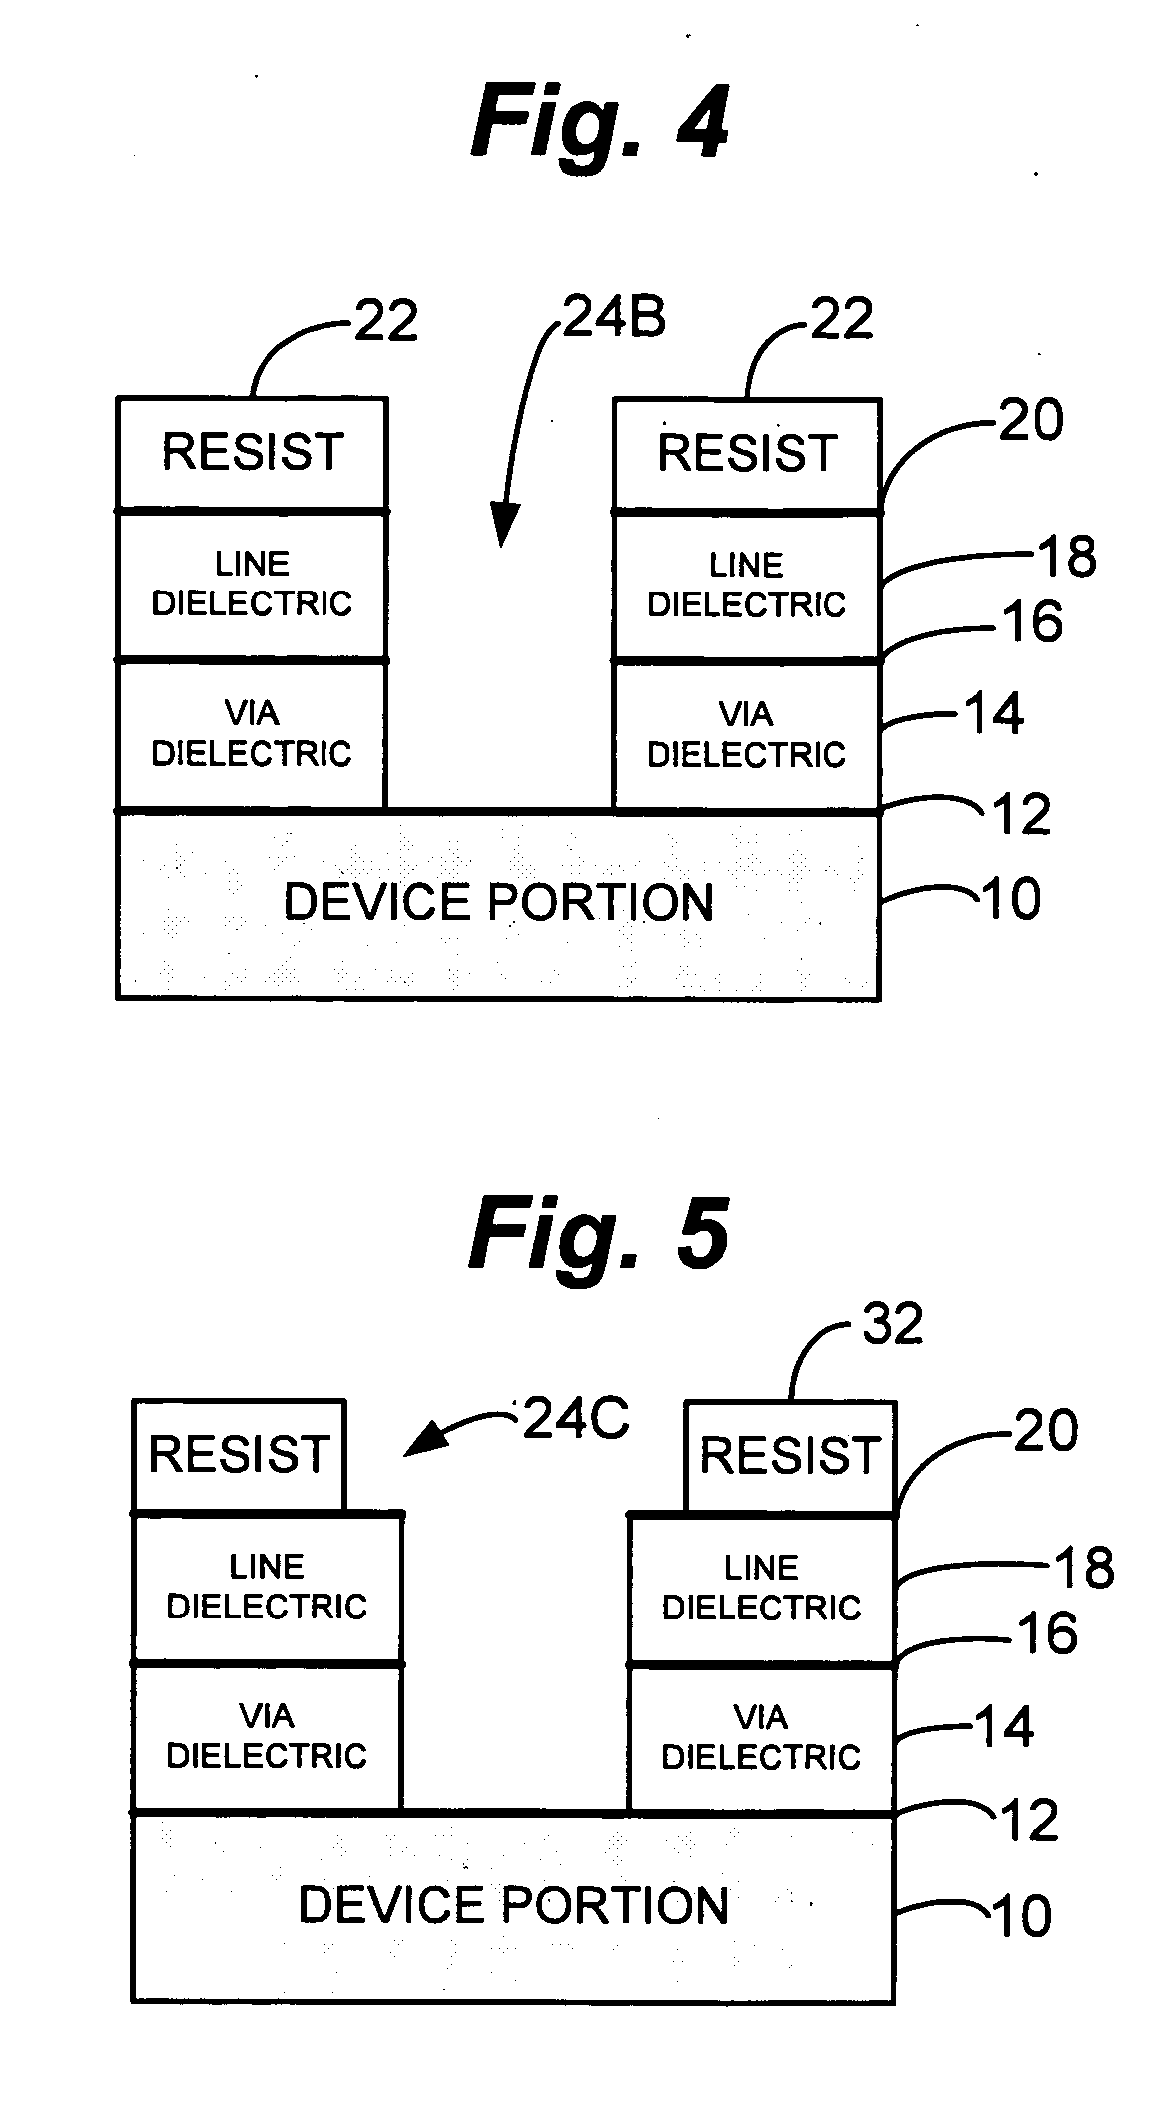 Air gap formation method for reducing undesired capacitive coupling between interconnects in an integrated circuit device